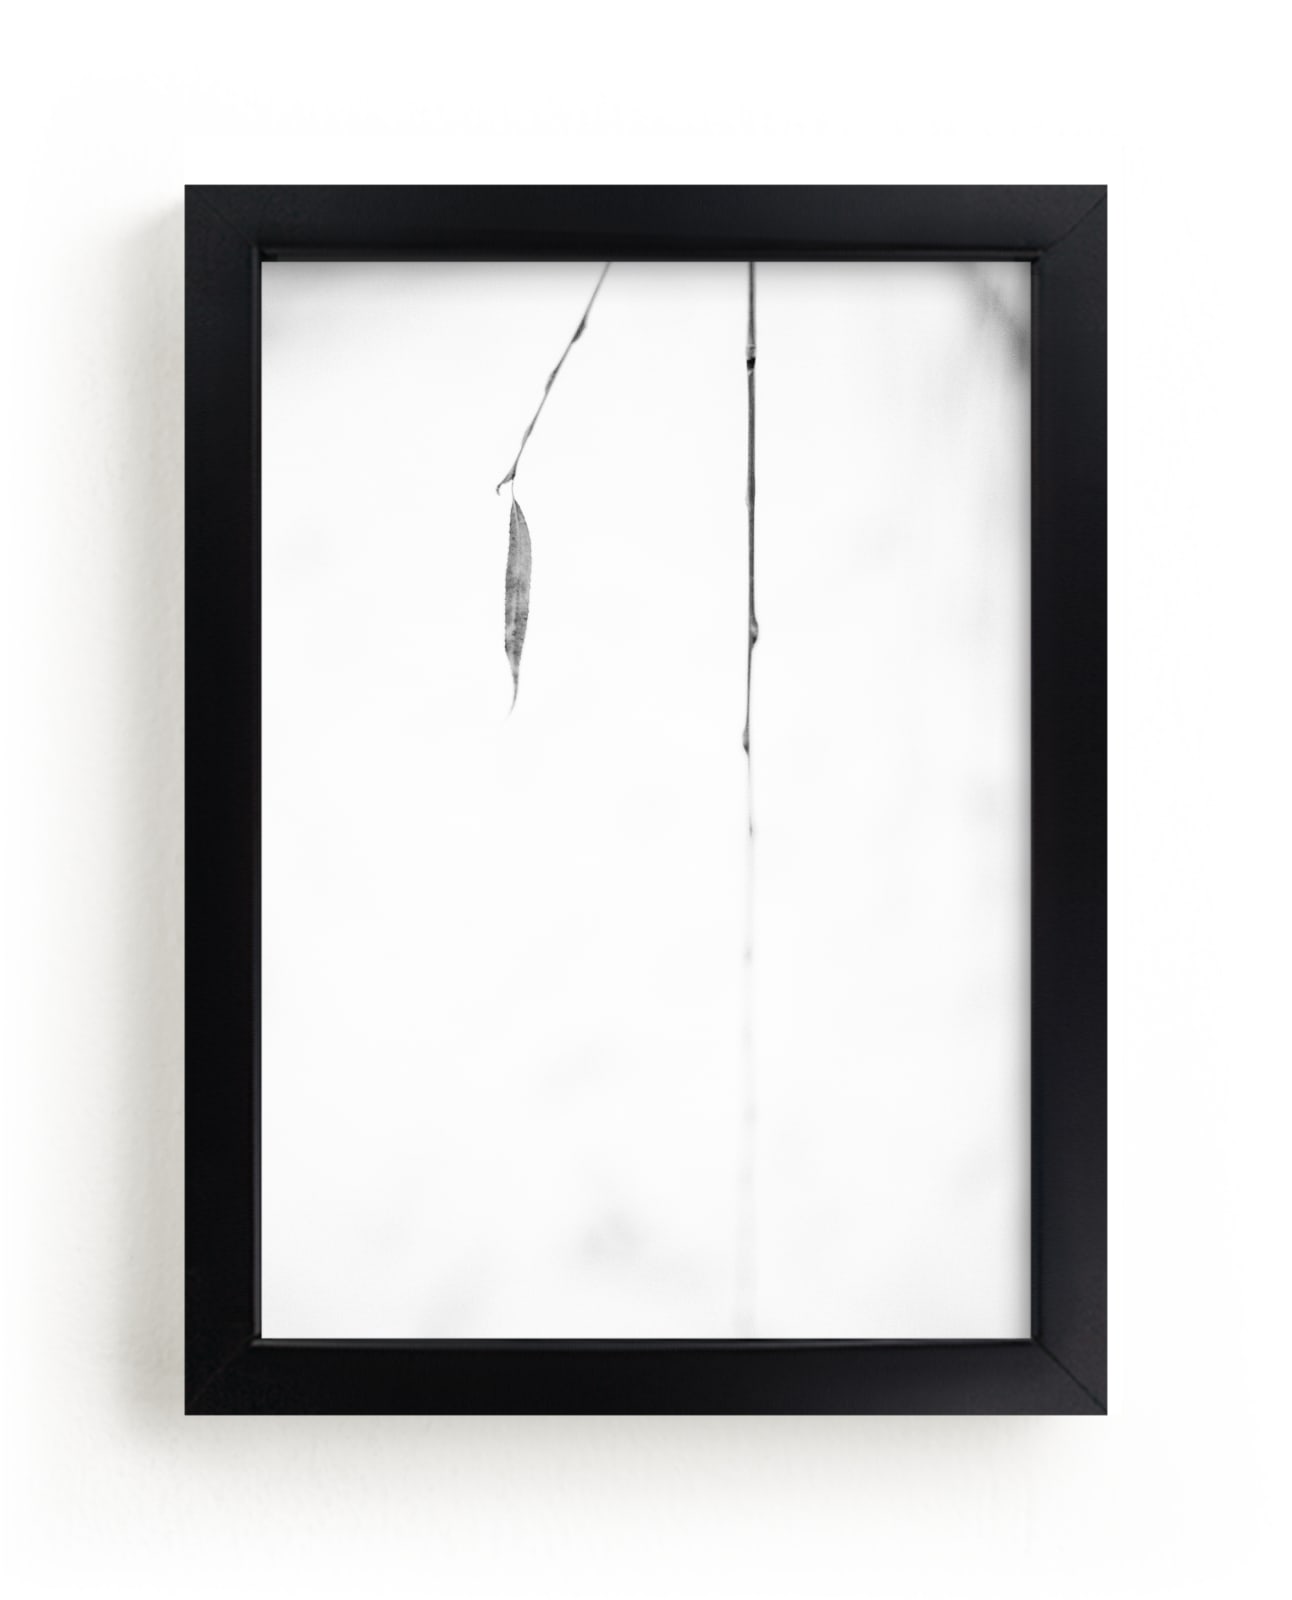 " Closer I" by Lying on the grass in beautiful frame options and a variety of sizes.